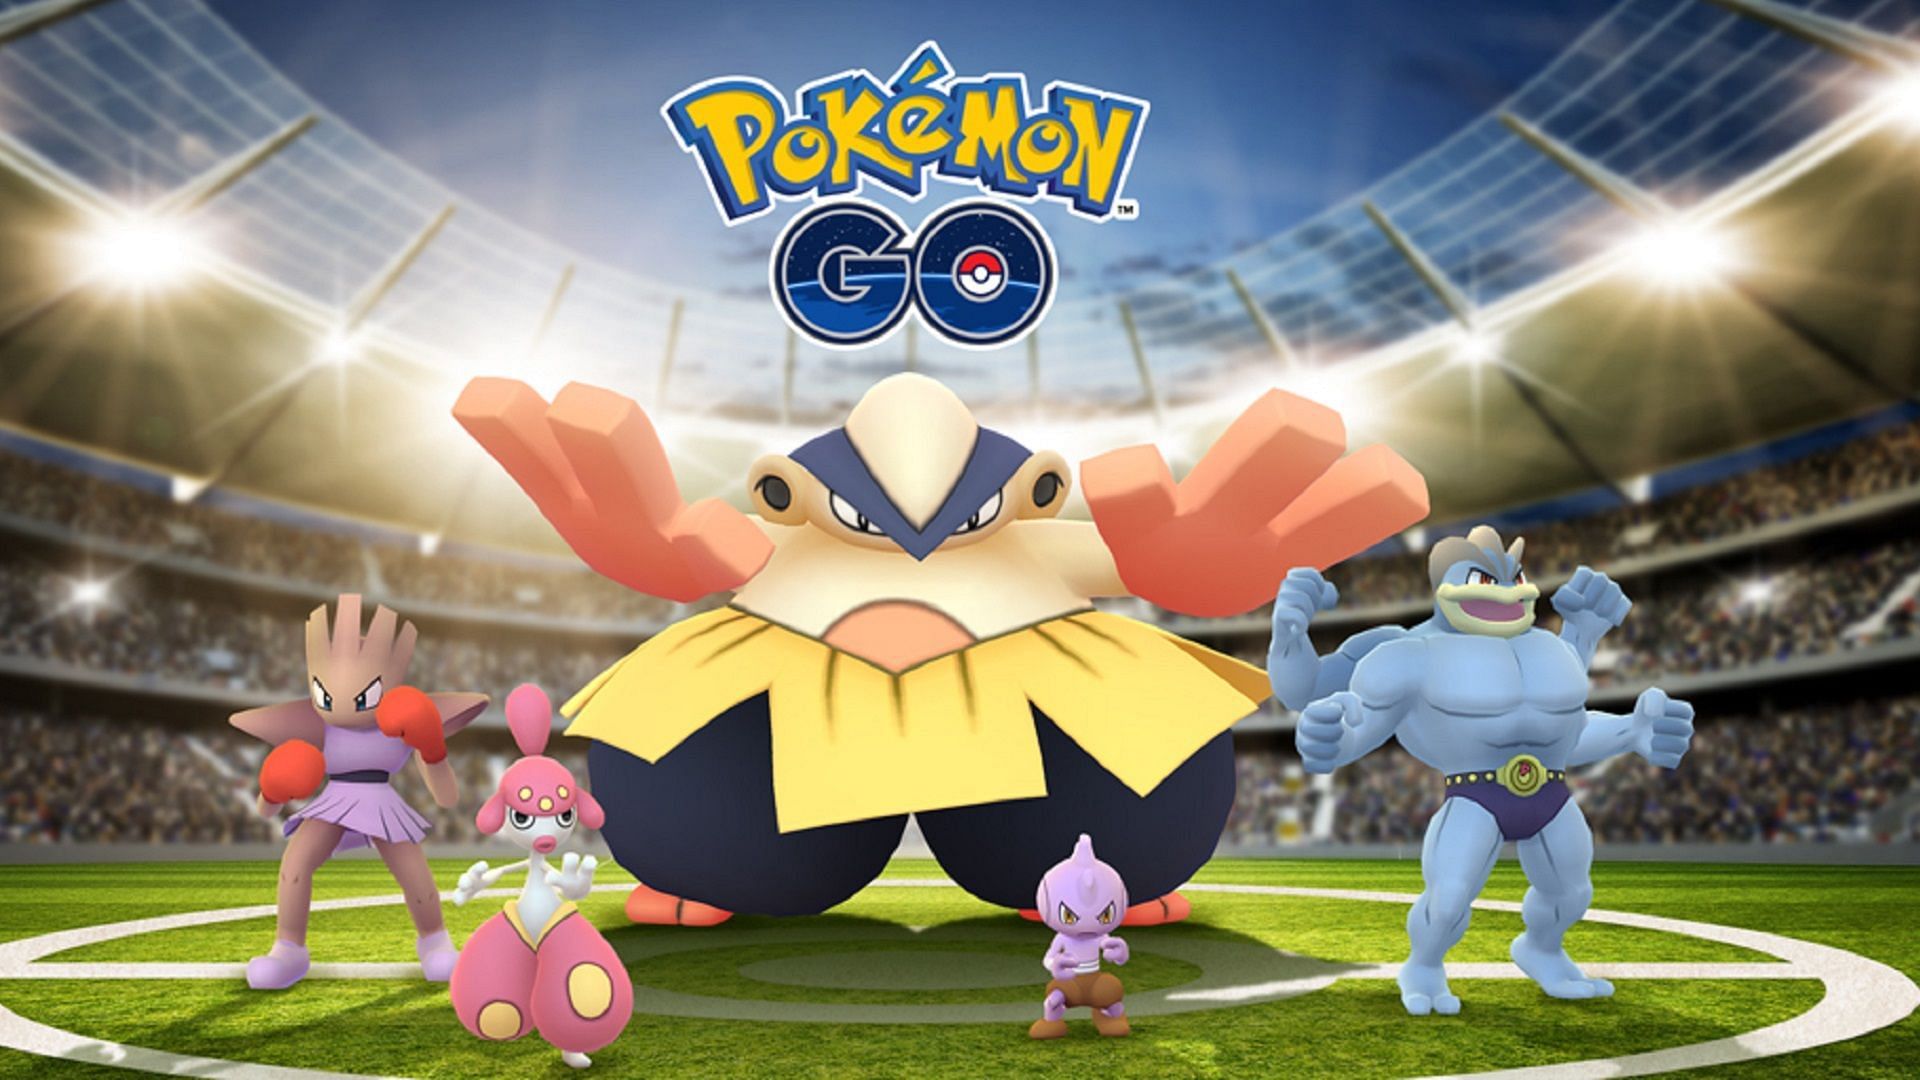 Fighting-type Pokemon are natural fits in Pokemon GO